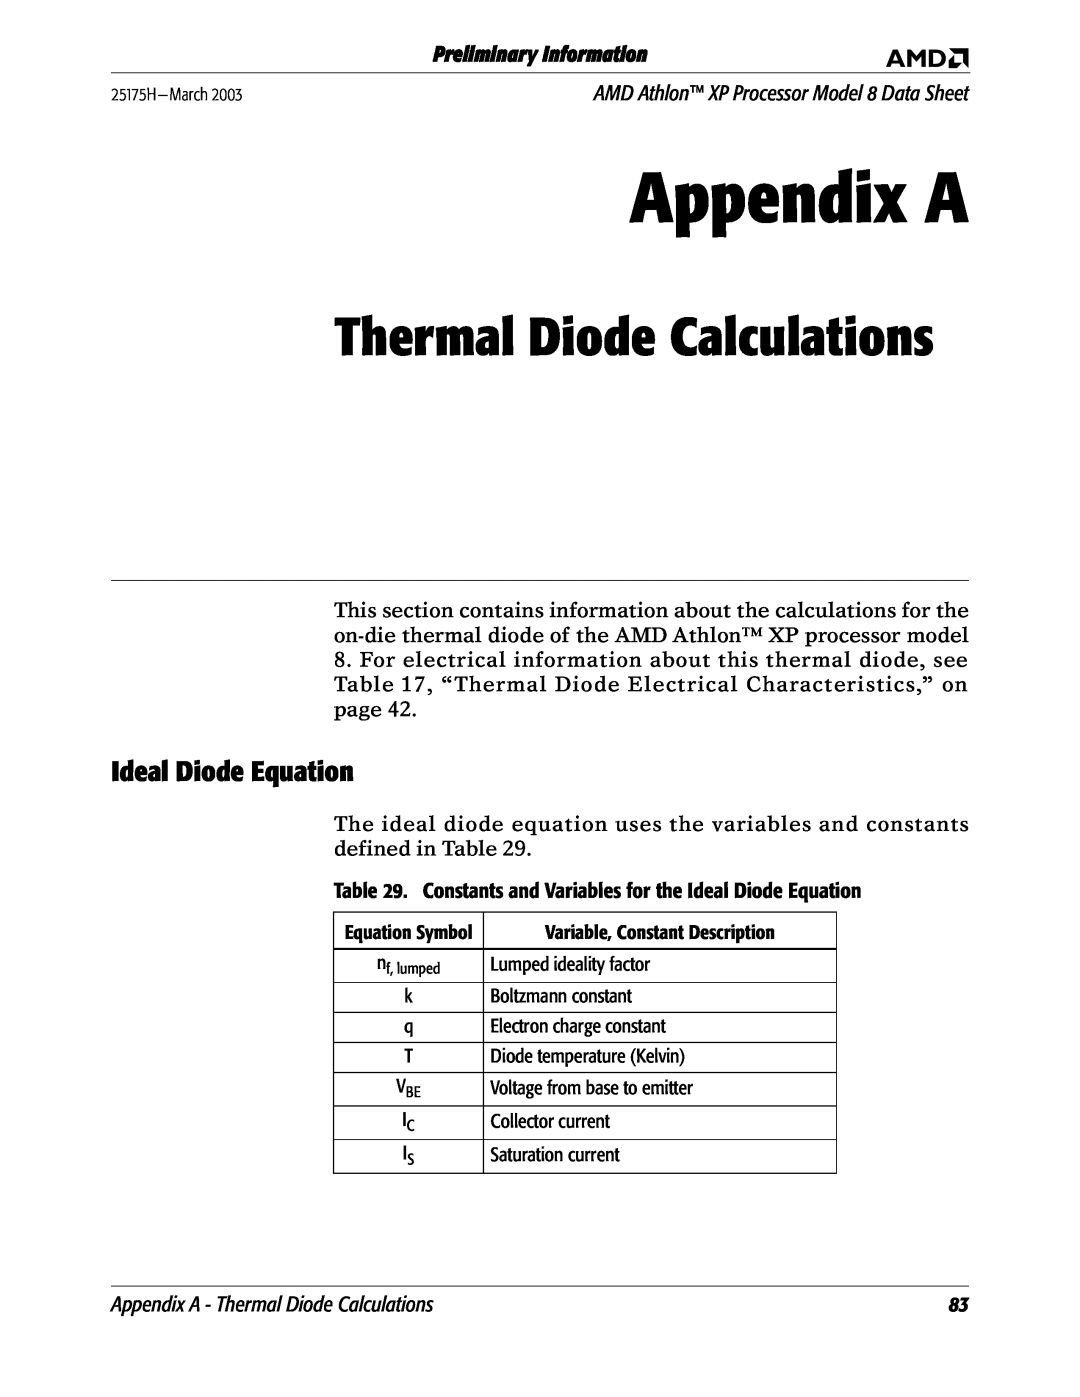 AMD 8 manual Ideal Diode Equation, Appendix A - Thermal Diode Calculations, Preliminary Information 